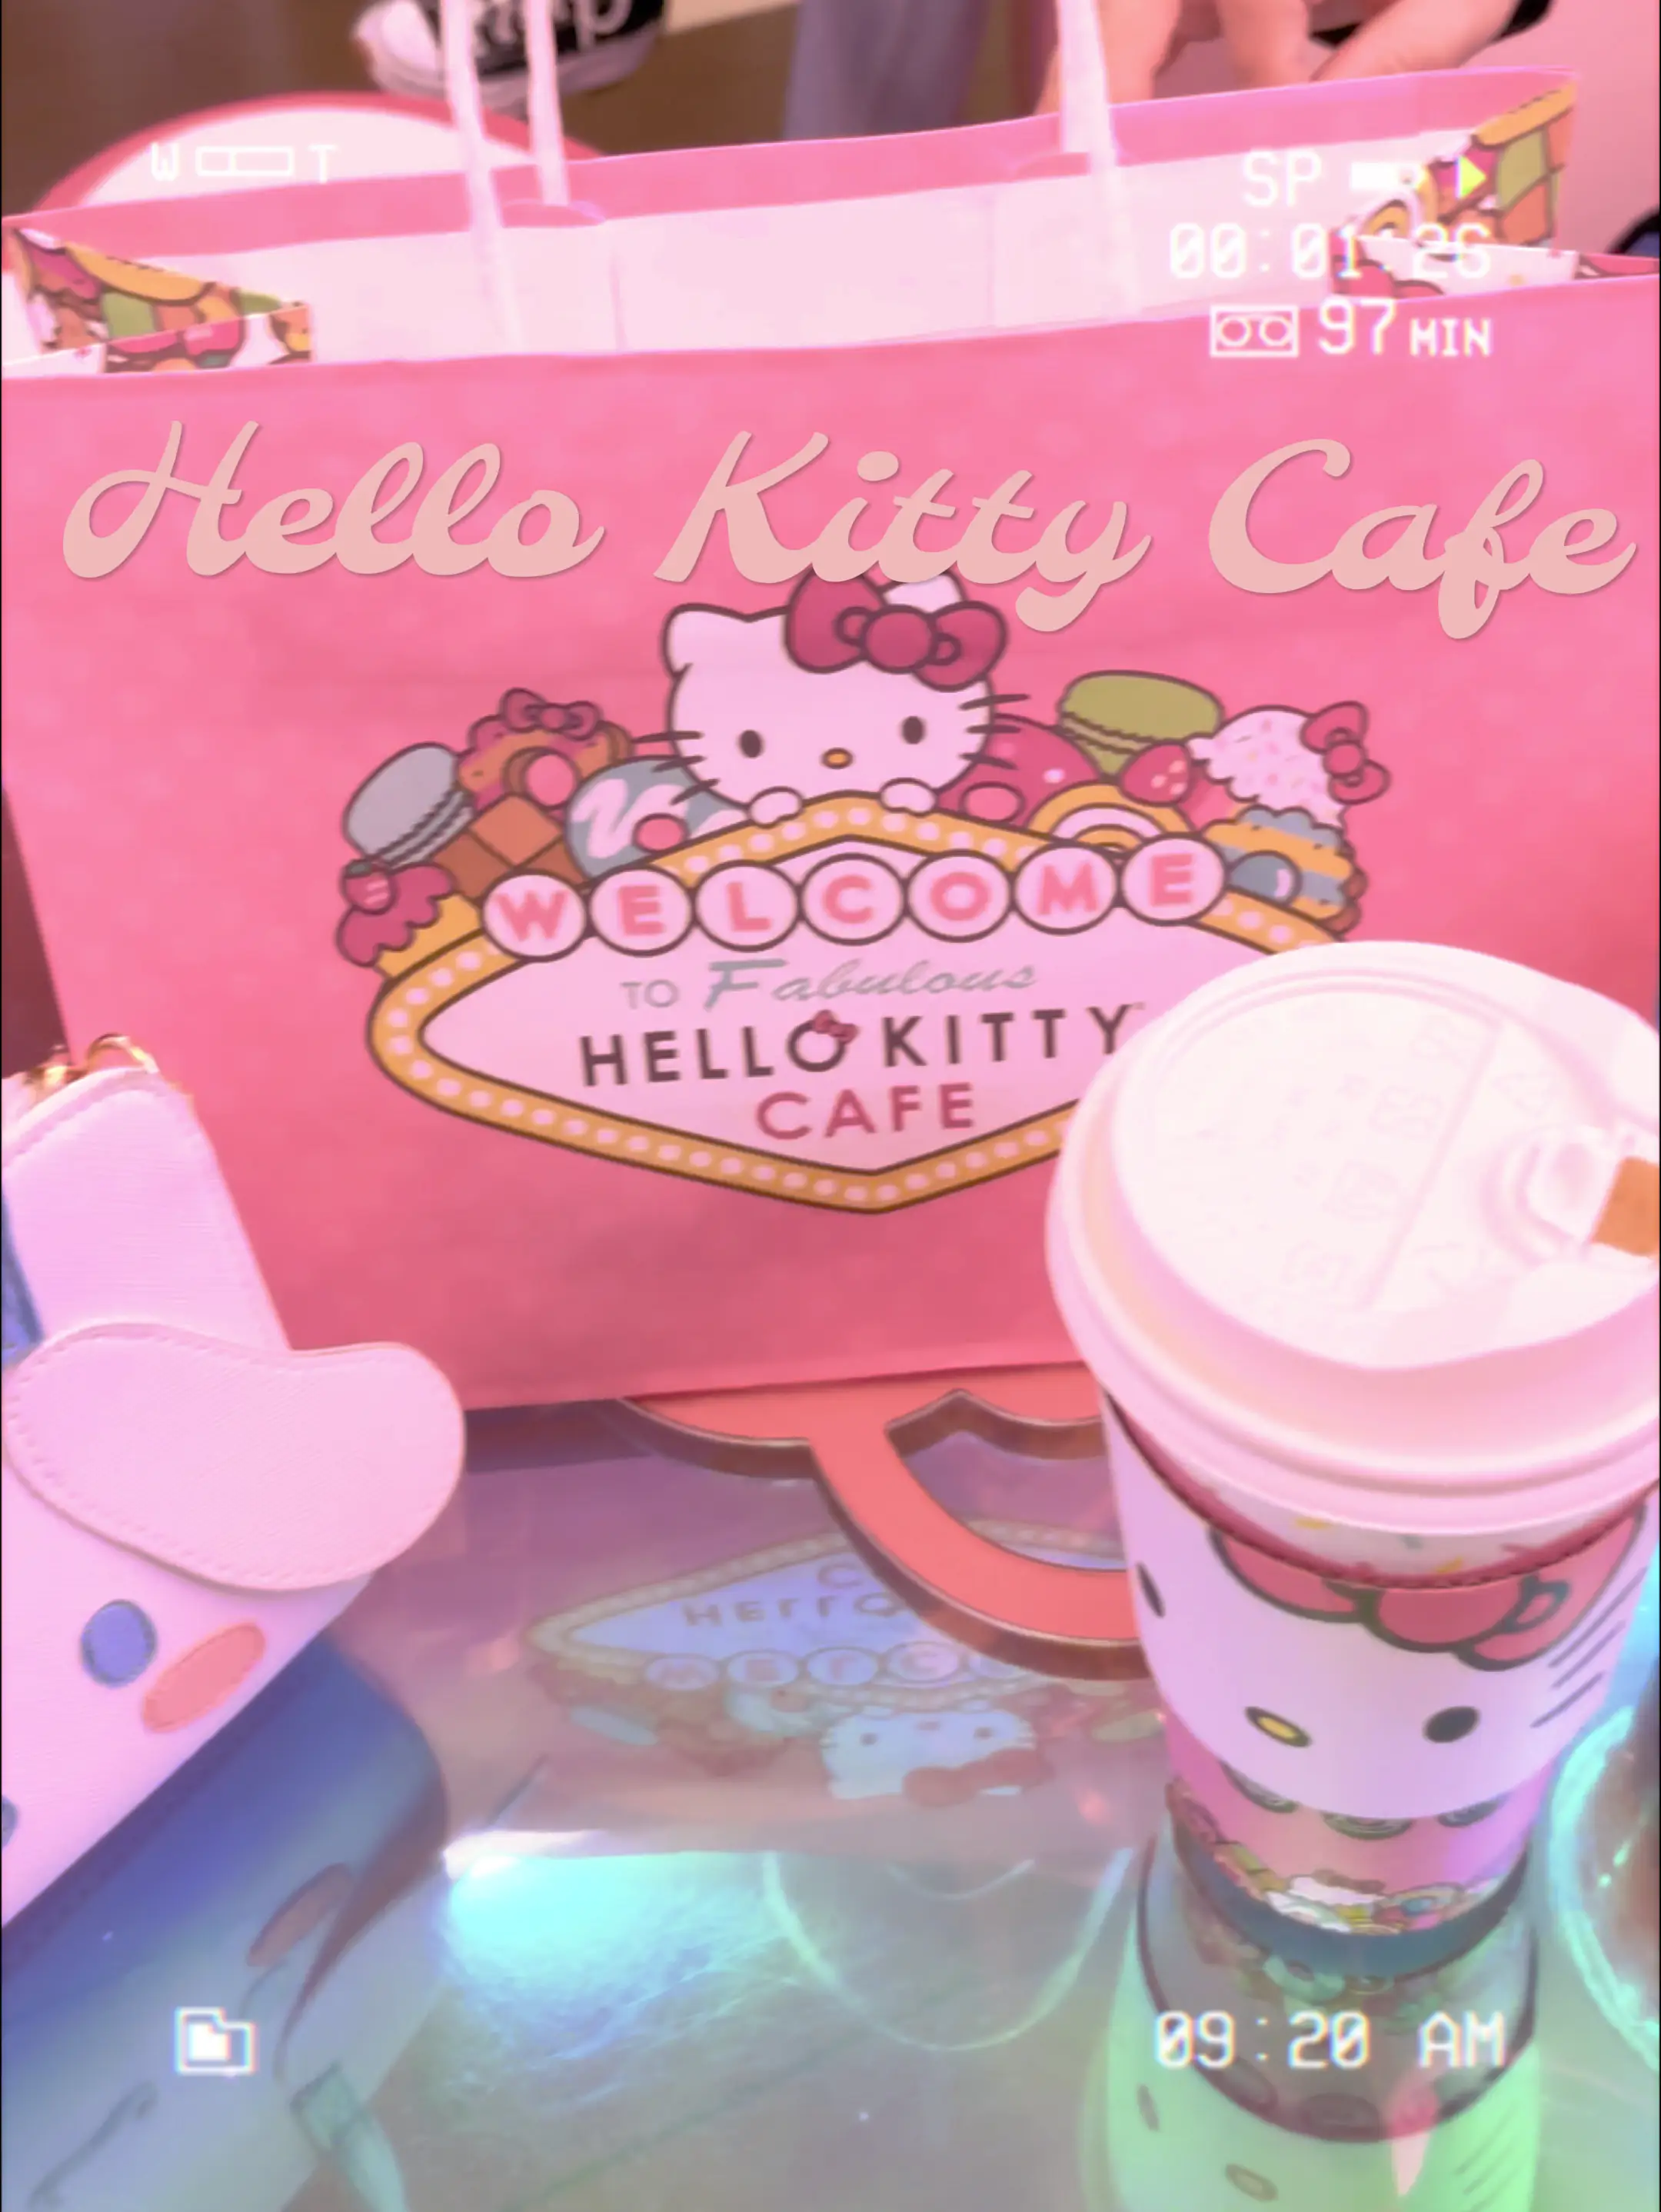 Hello Kitty Cafe - Our new lemony sweet menu is back! 🍋✨Come on